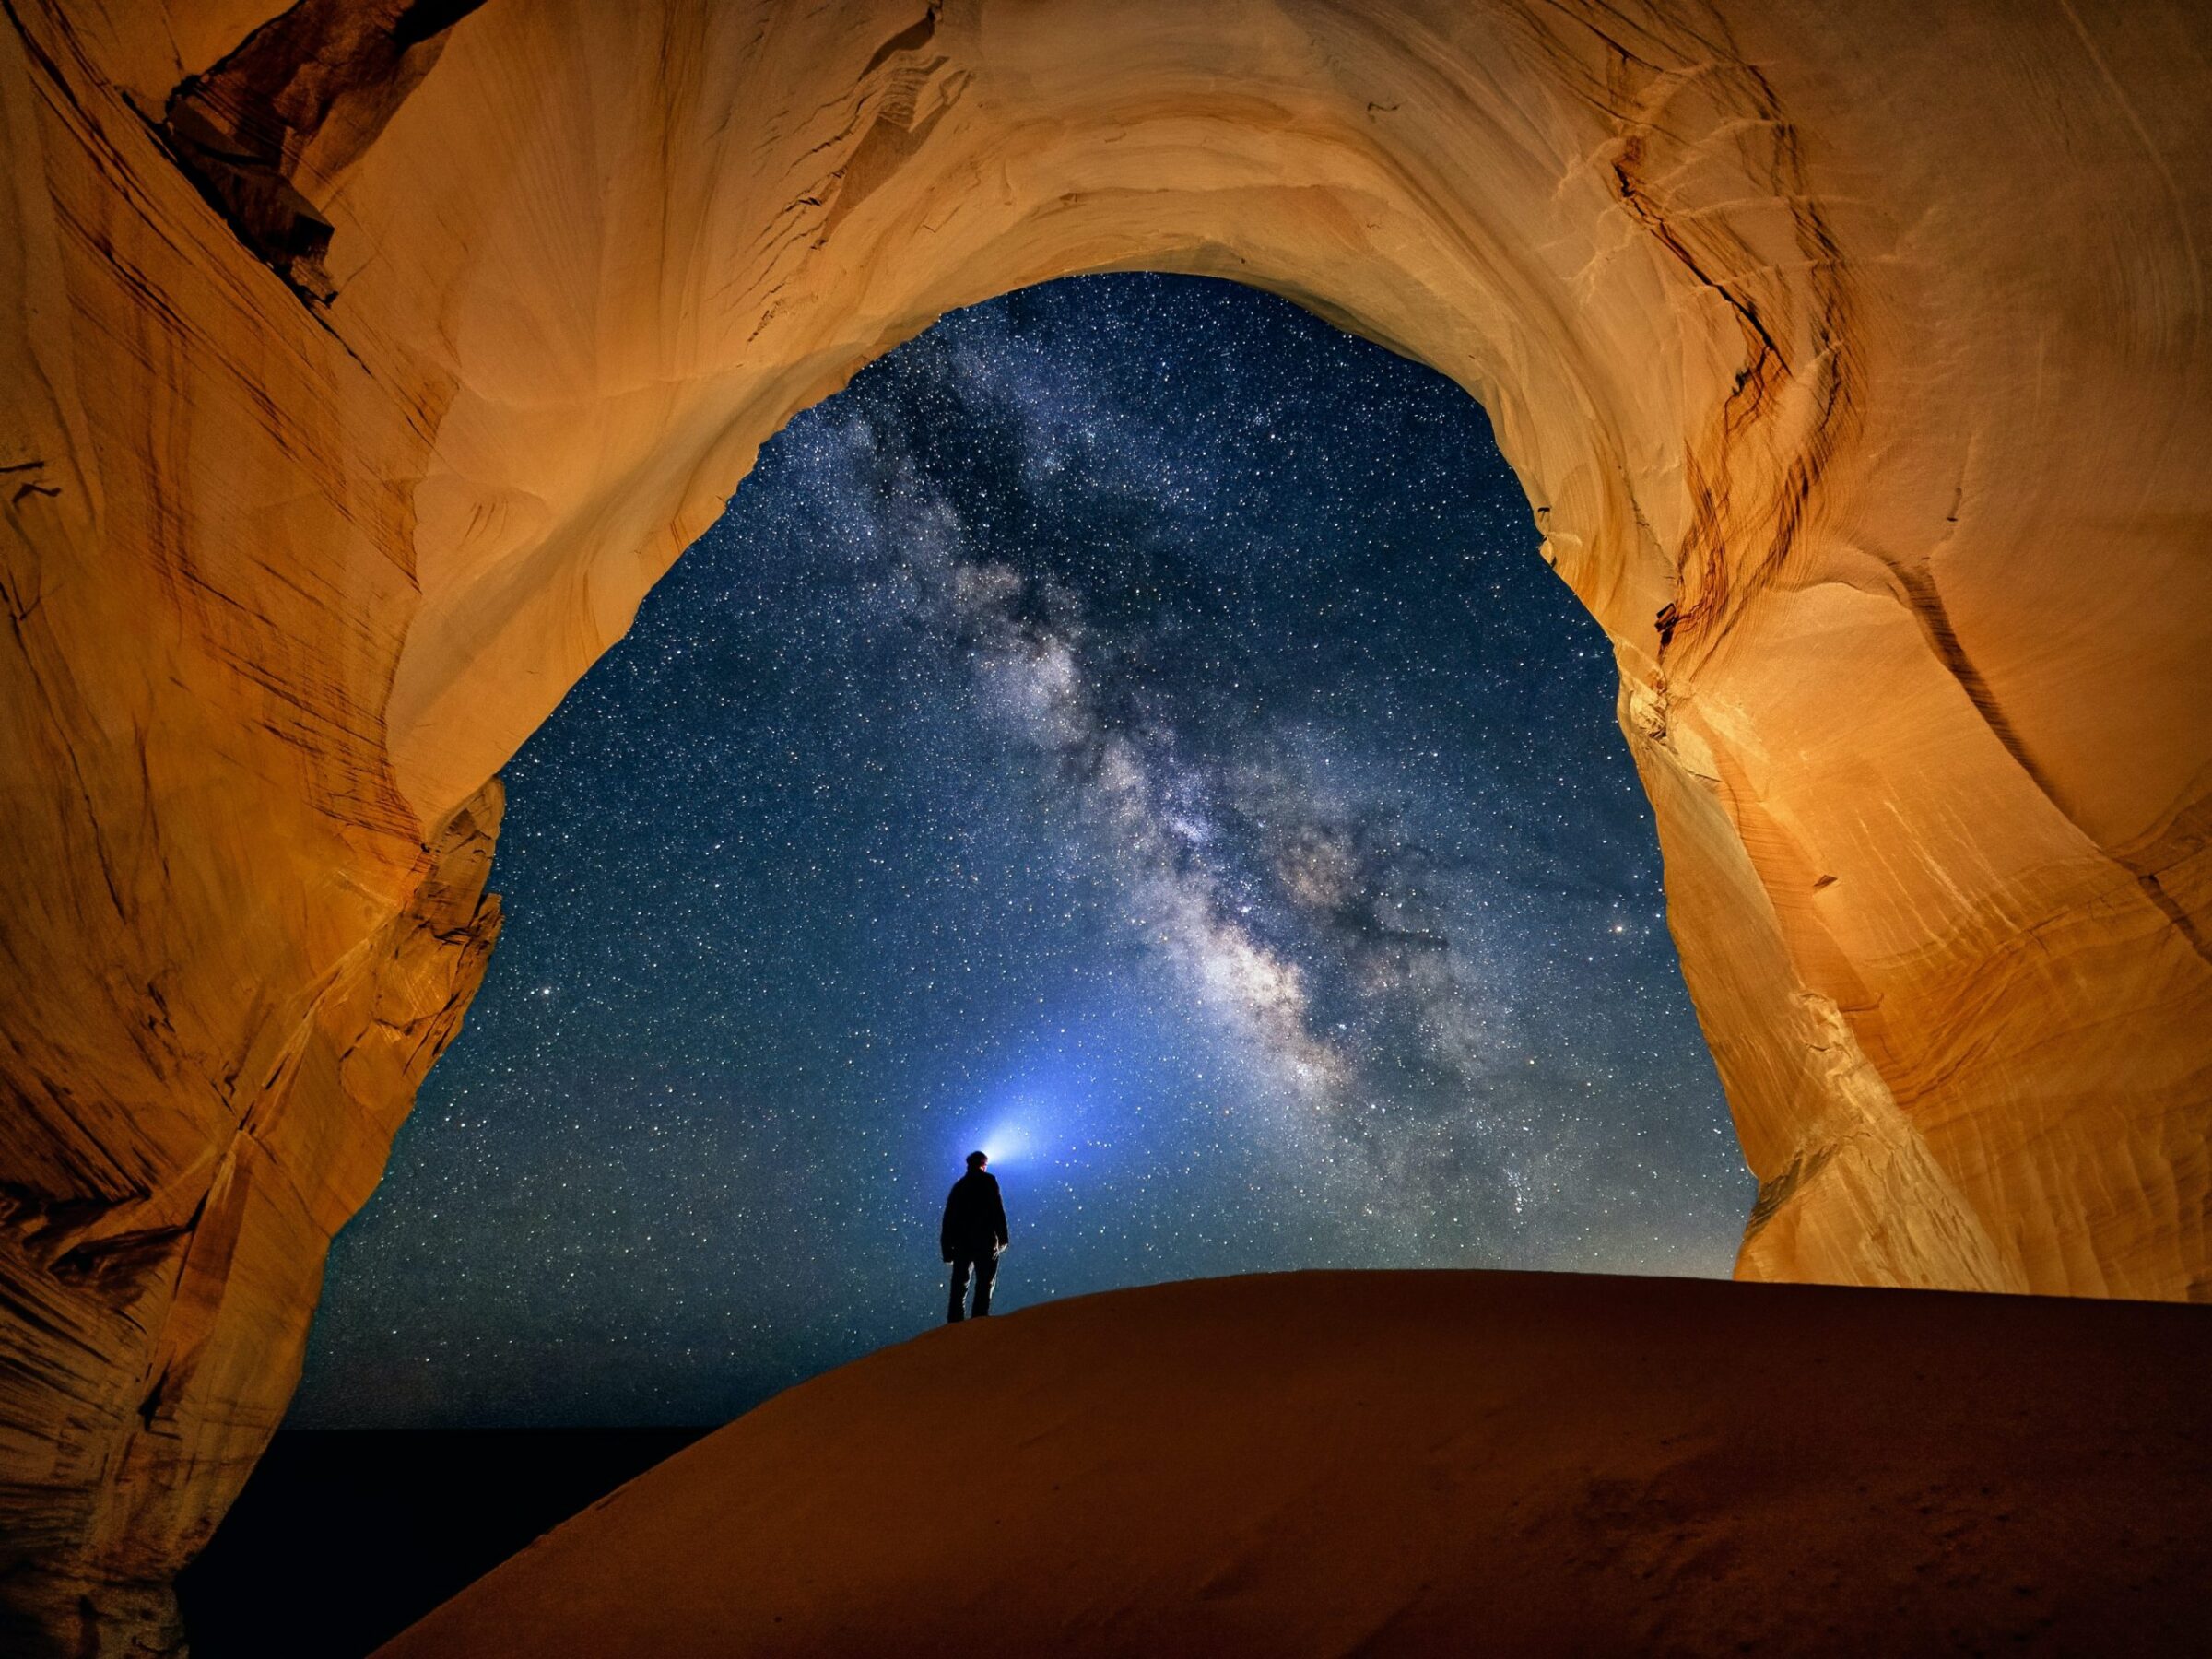 An image of a person looking out of a cave into the night sky